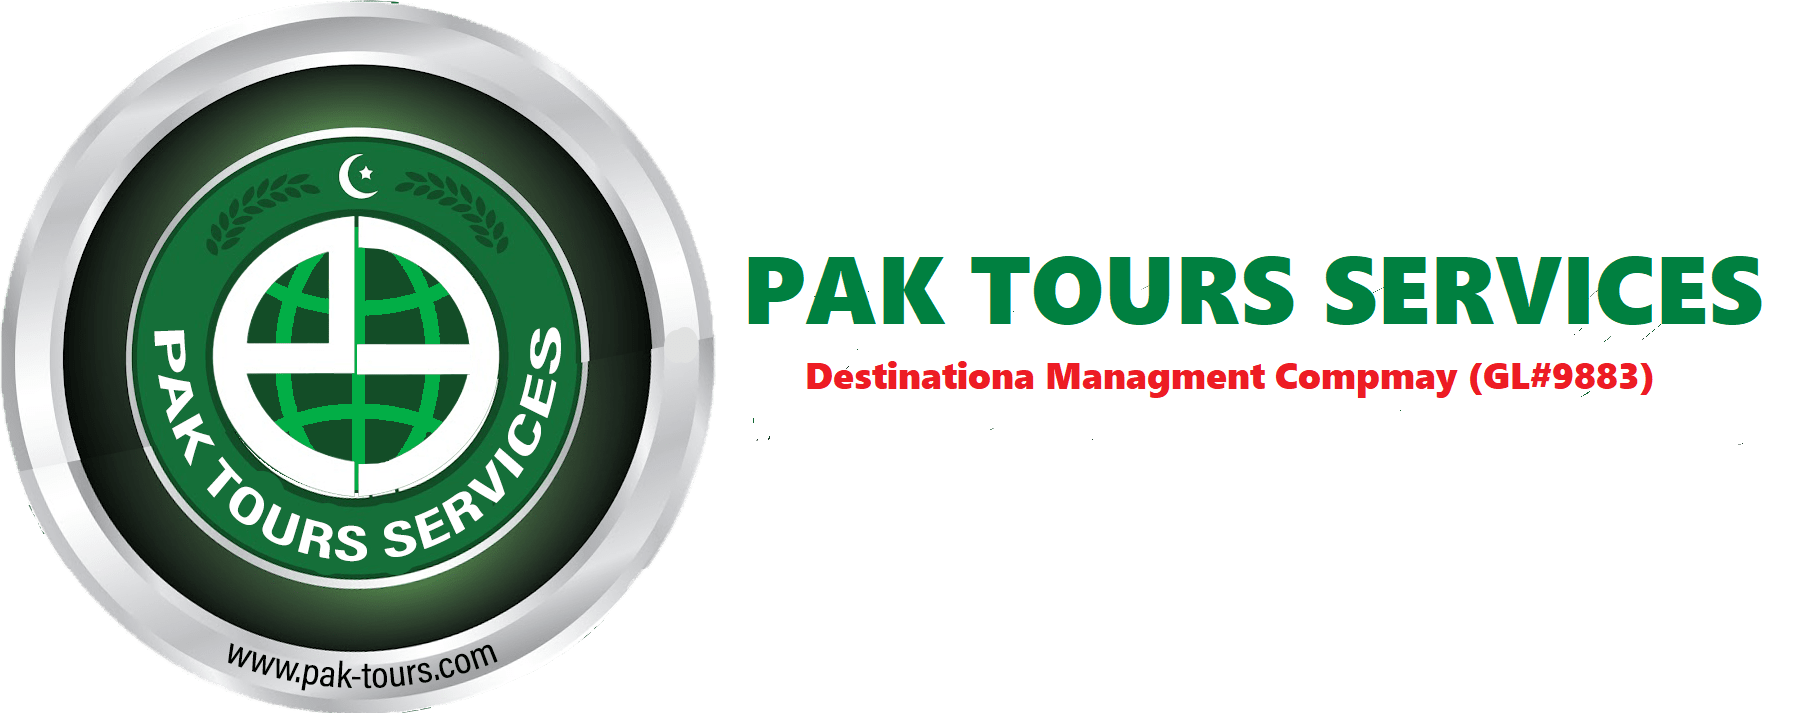 Your Trusted Travel Partner | Hunza Tour Packages (Family & Honeymoon ) -